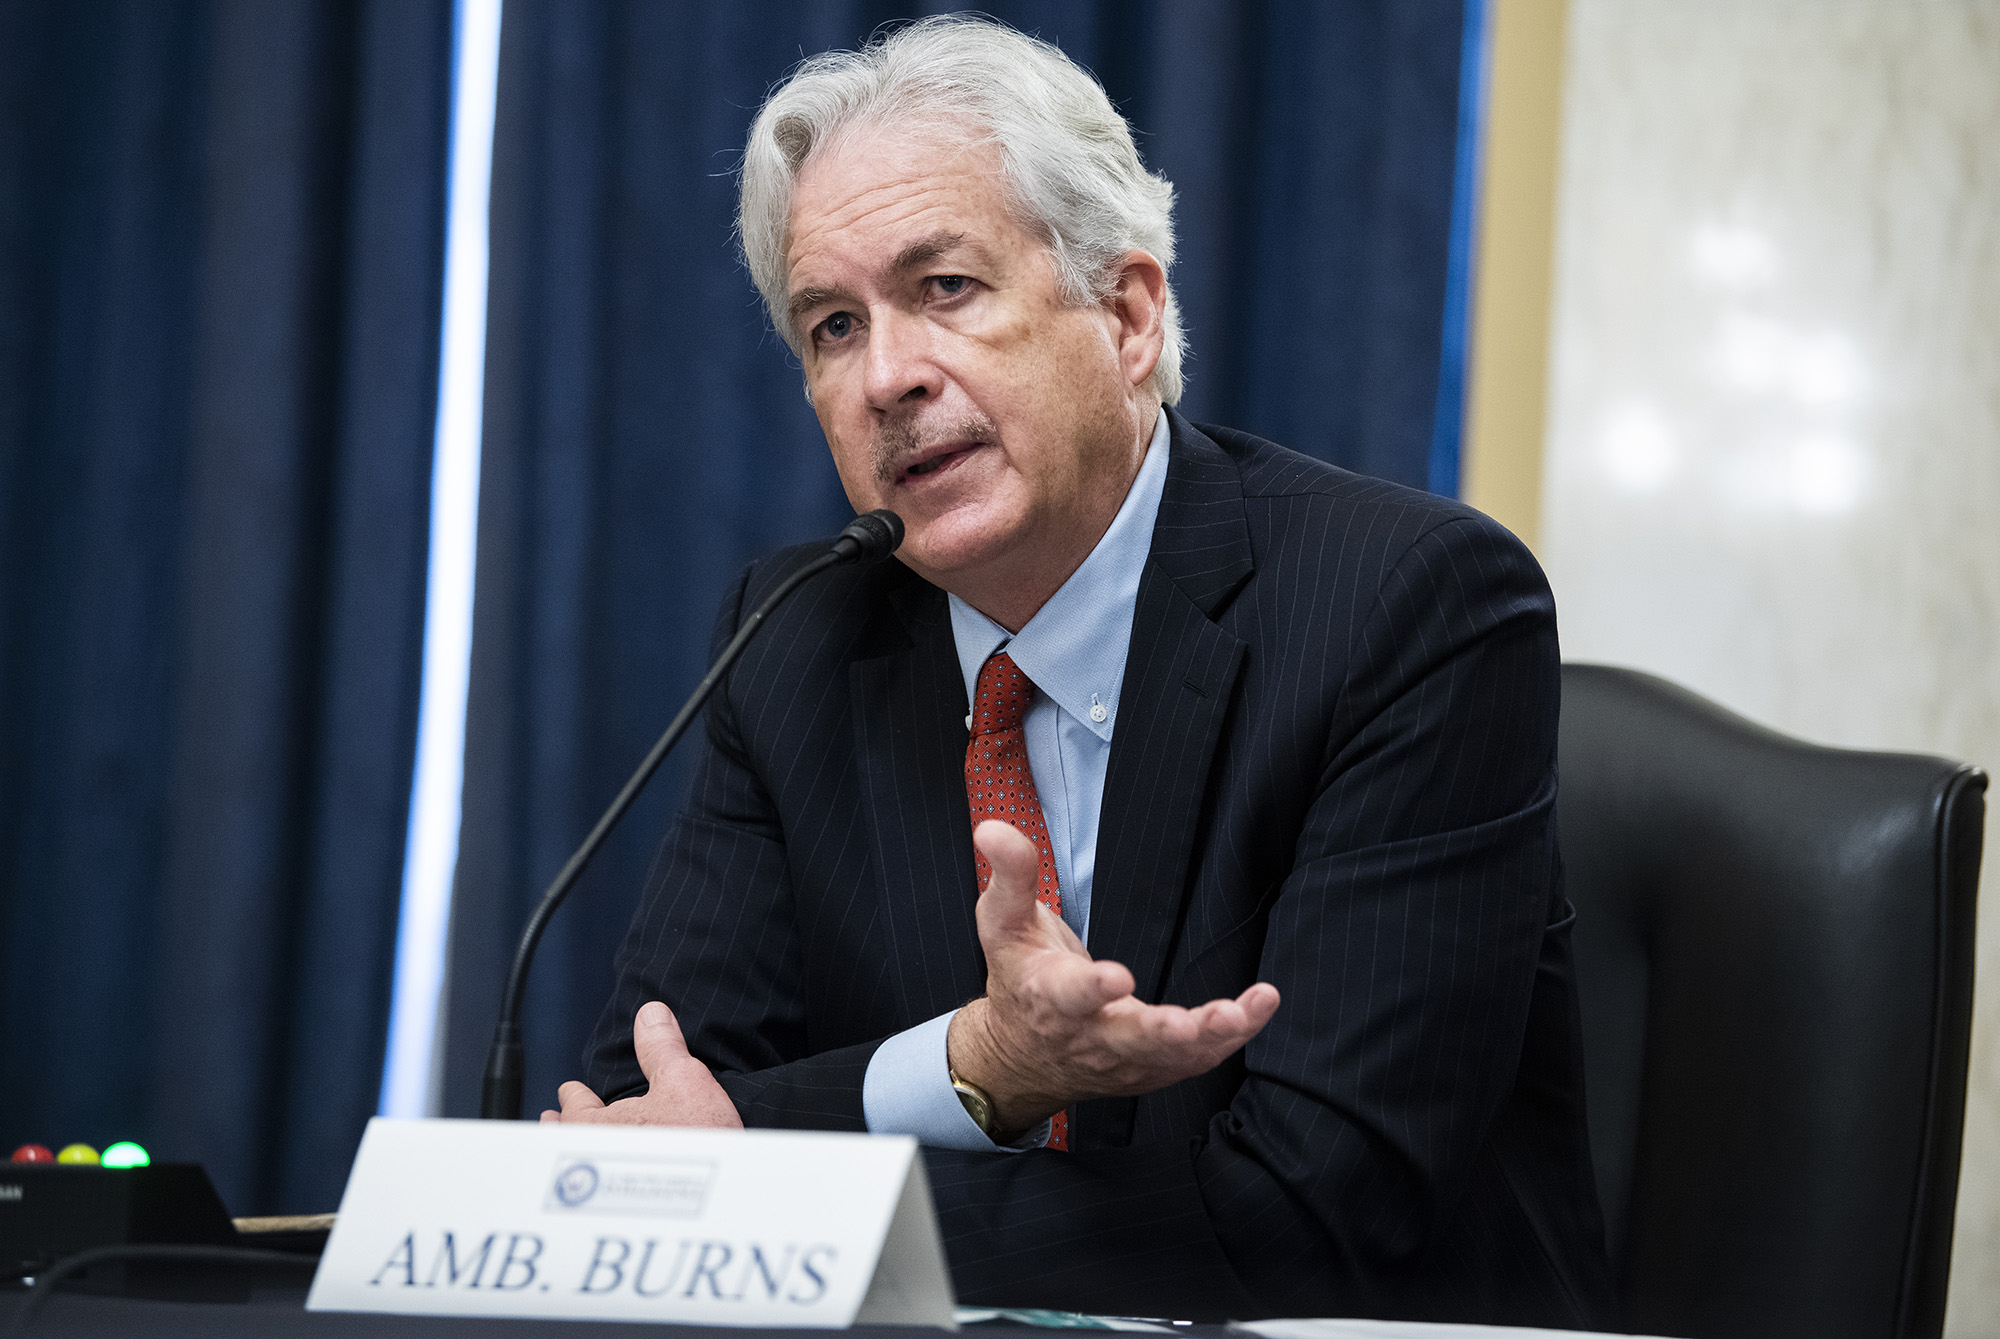 William Burns, nominee for Central Intelligence Agency director, testifies during his Senate Select Intelligence Committee confirmation hearing, on February 24, 2021, on Capitol Hill in Washington.